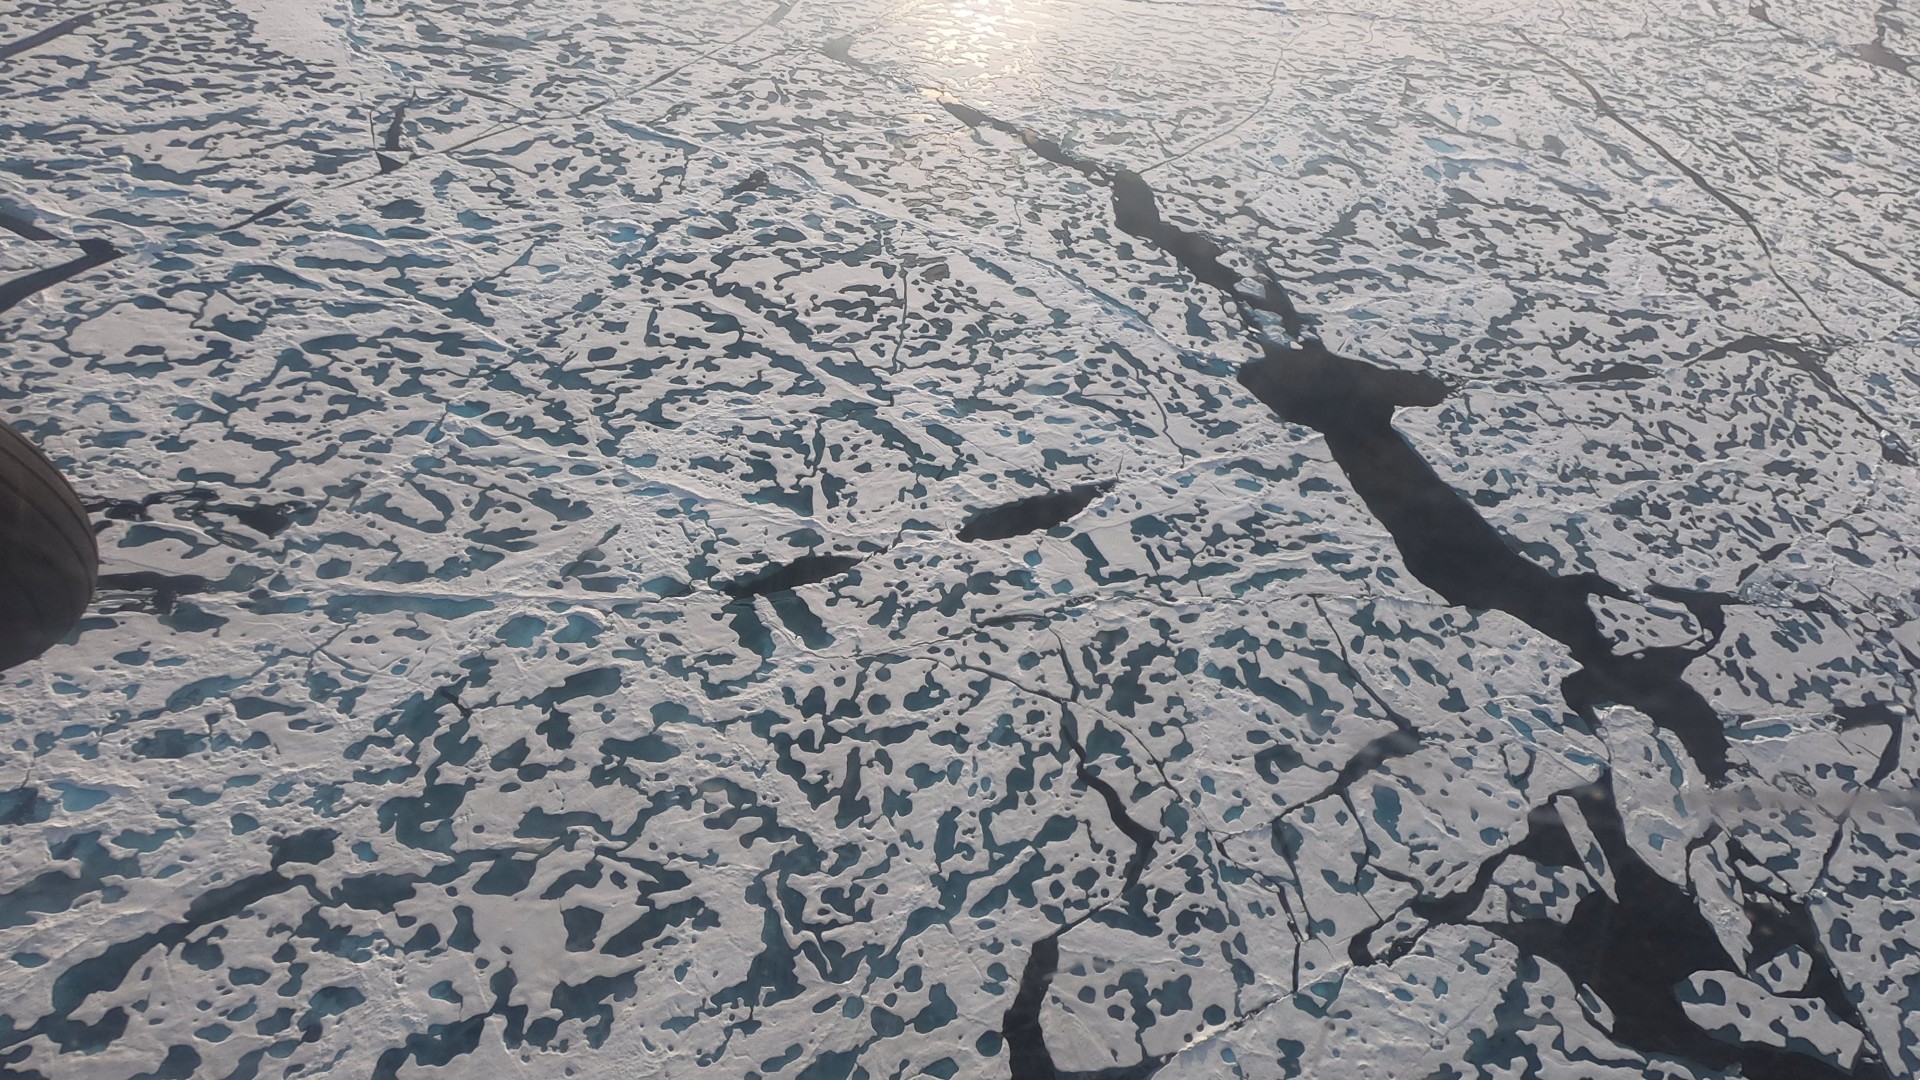 Scientists are working on automatic mapping of drift sea ice in the Arctic using satellites and artificial intelligence. (Photo:  DTU Space/ESA, Andreas Stokholm)